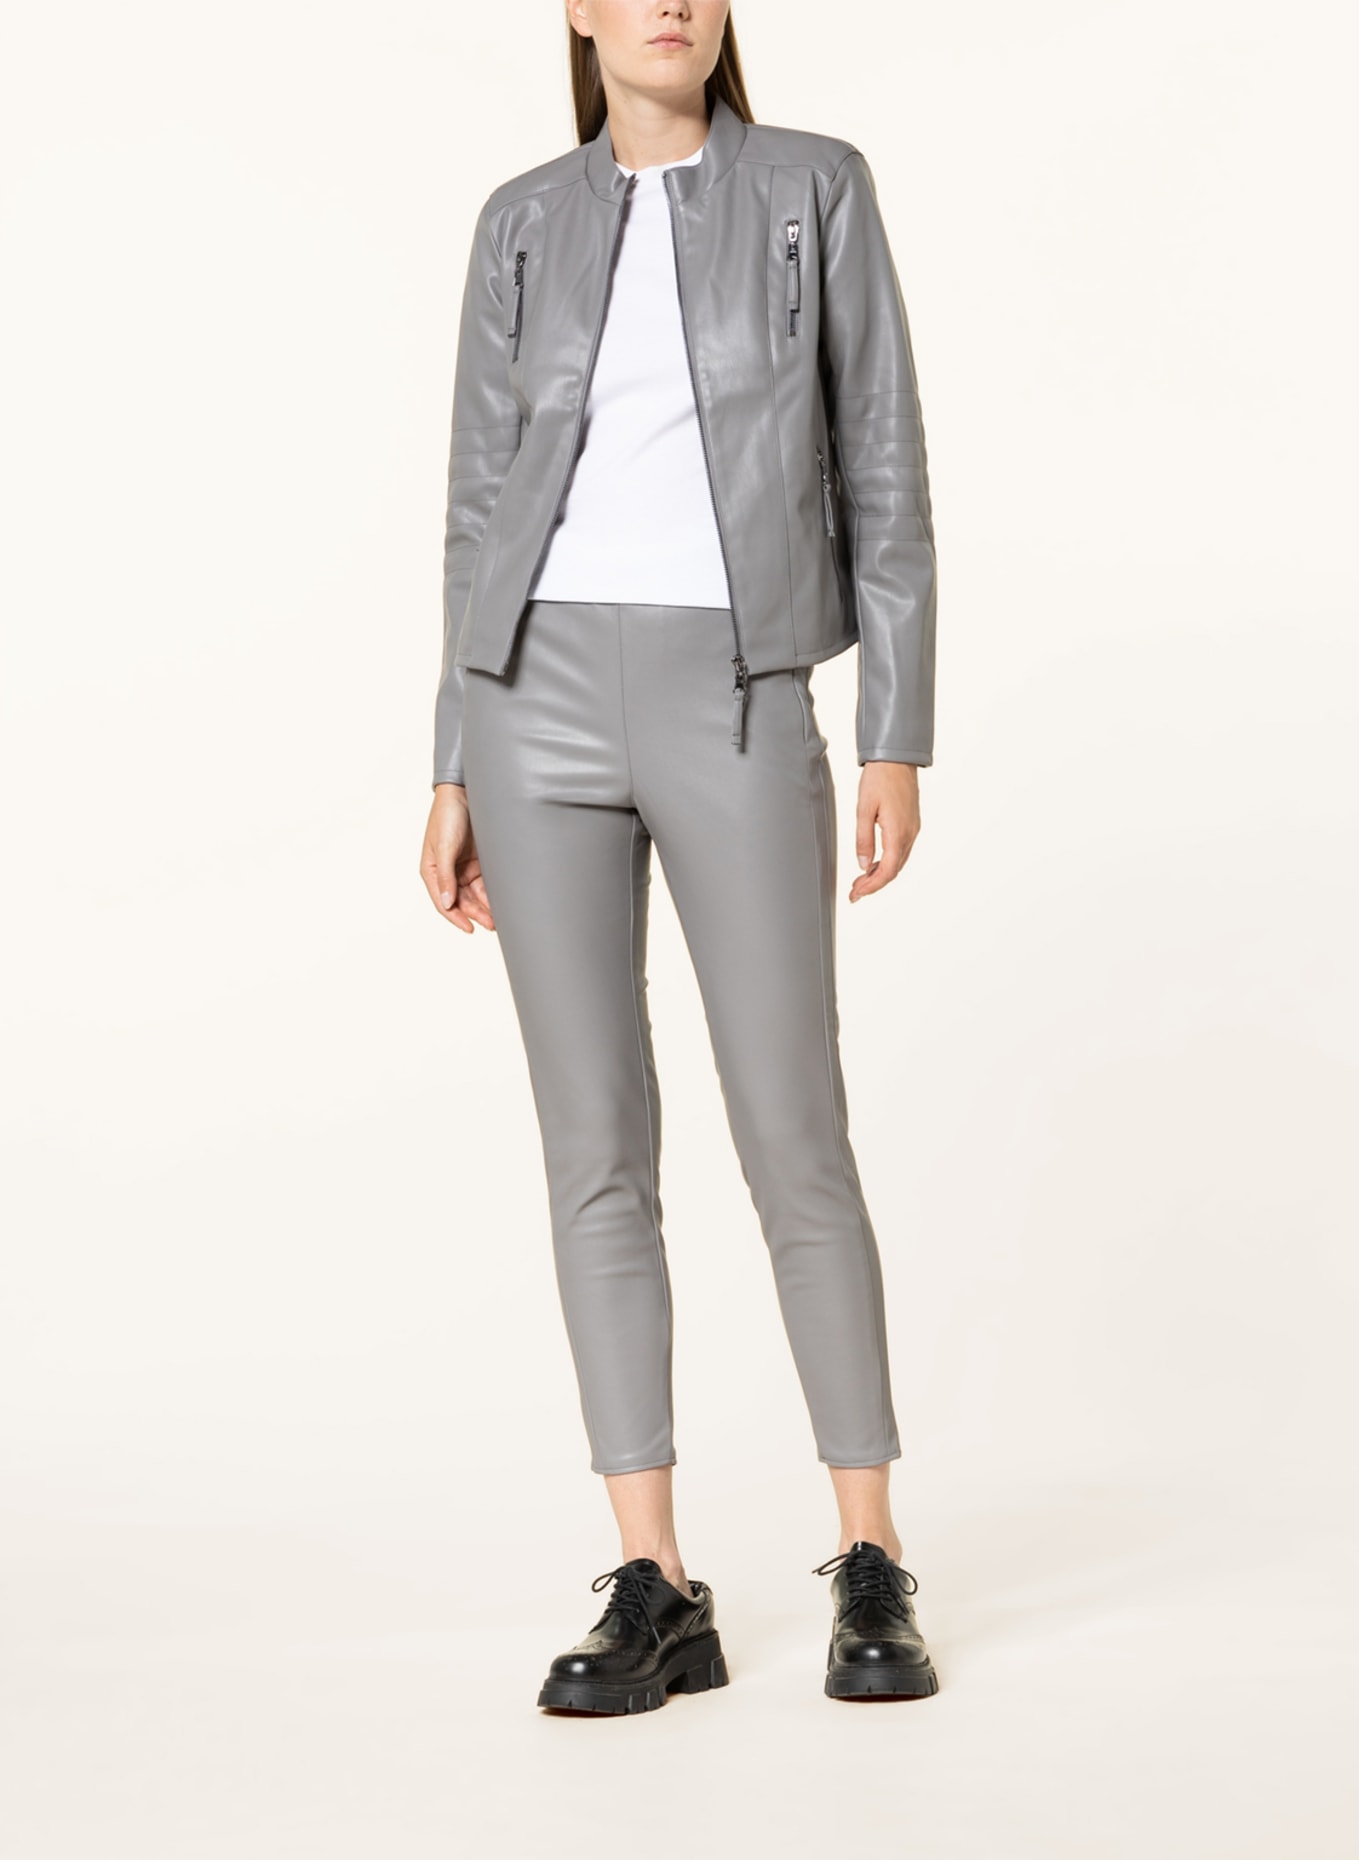 monari Trousers in leather look, Color: GRAY (Image 2)